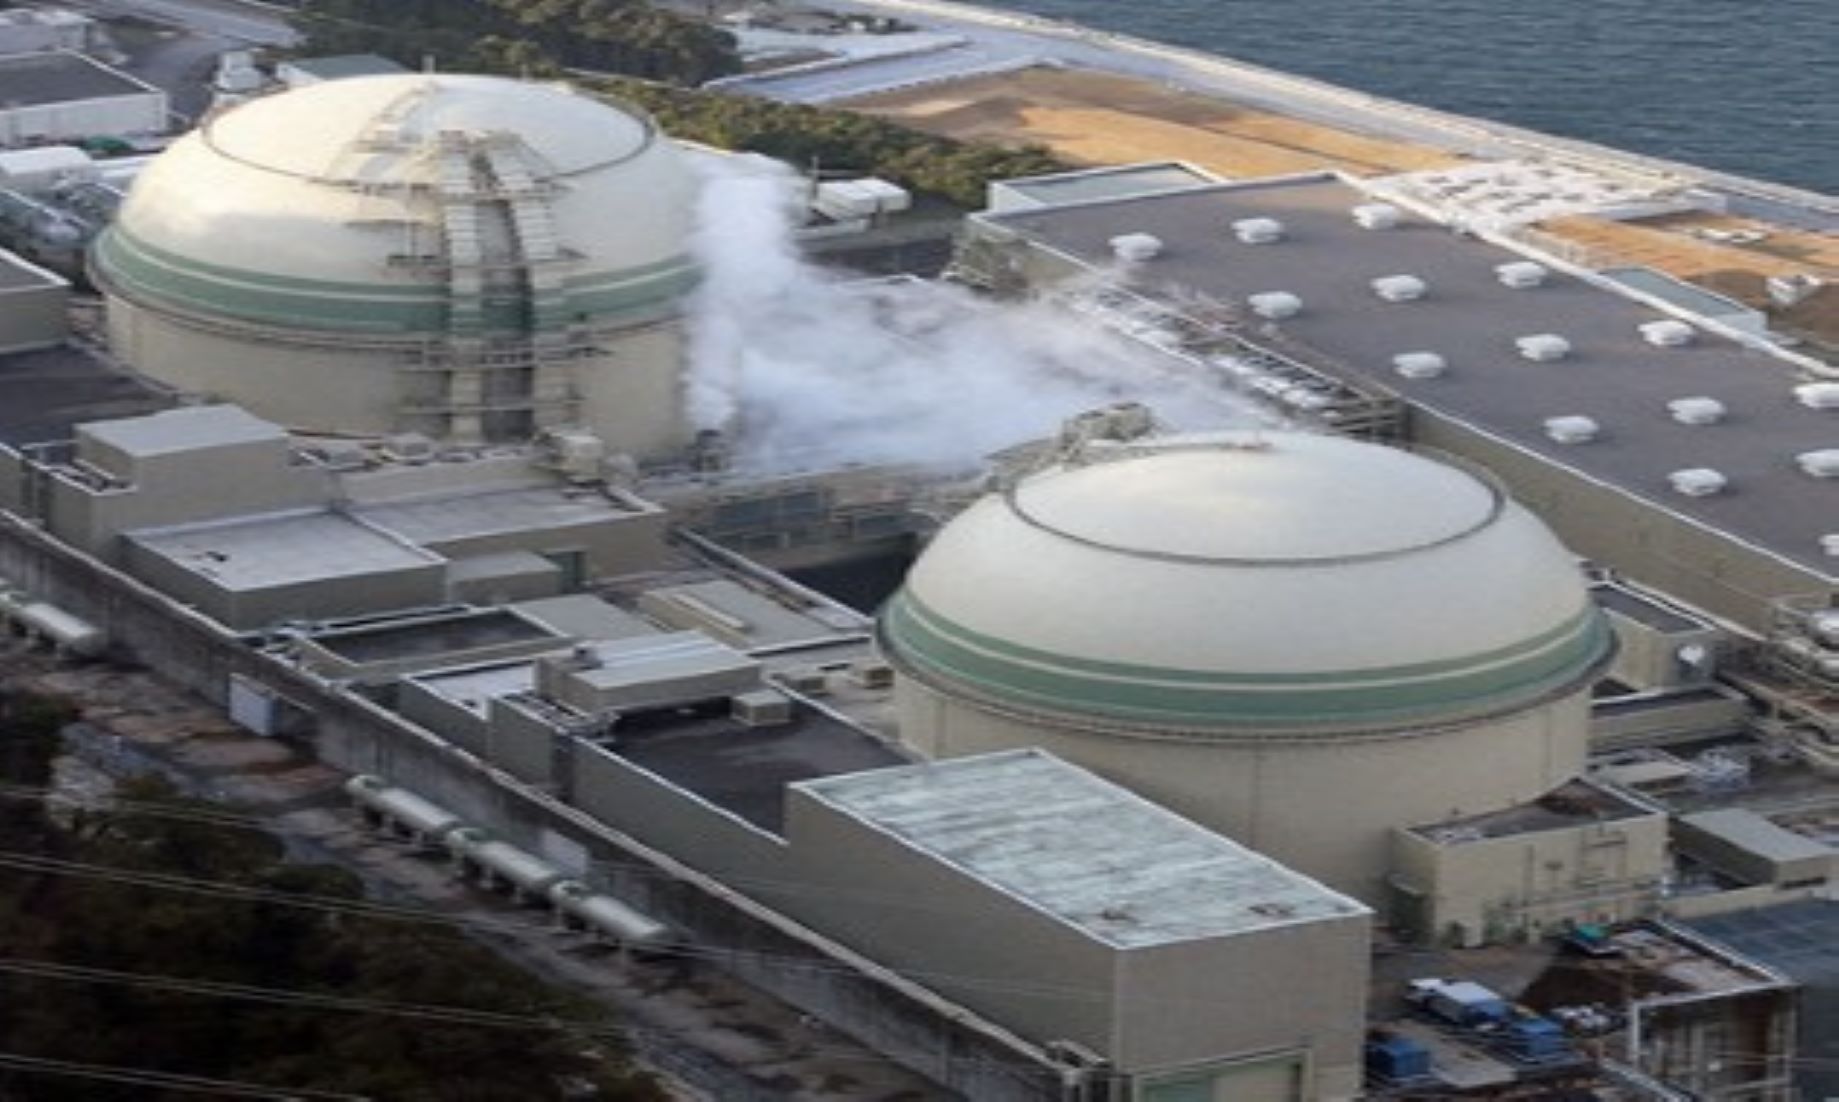 Japan’s Takahama Nuclear Reactor Halted After Alert Went Off